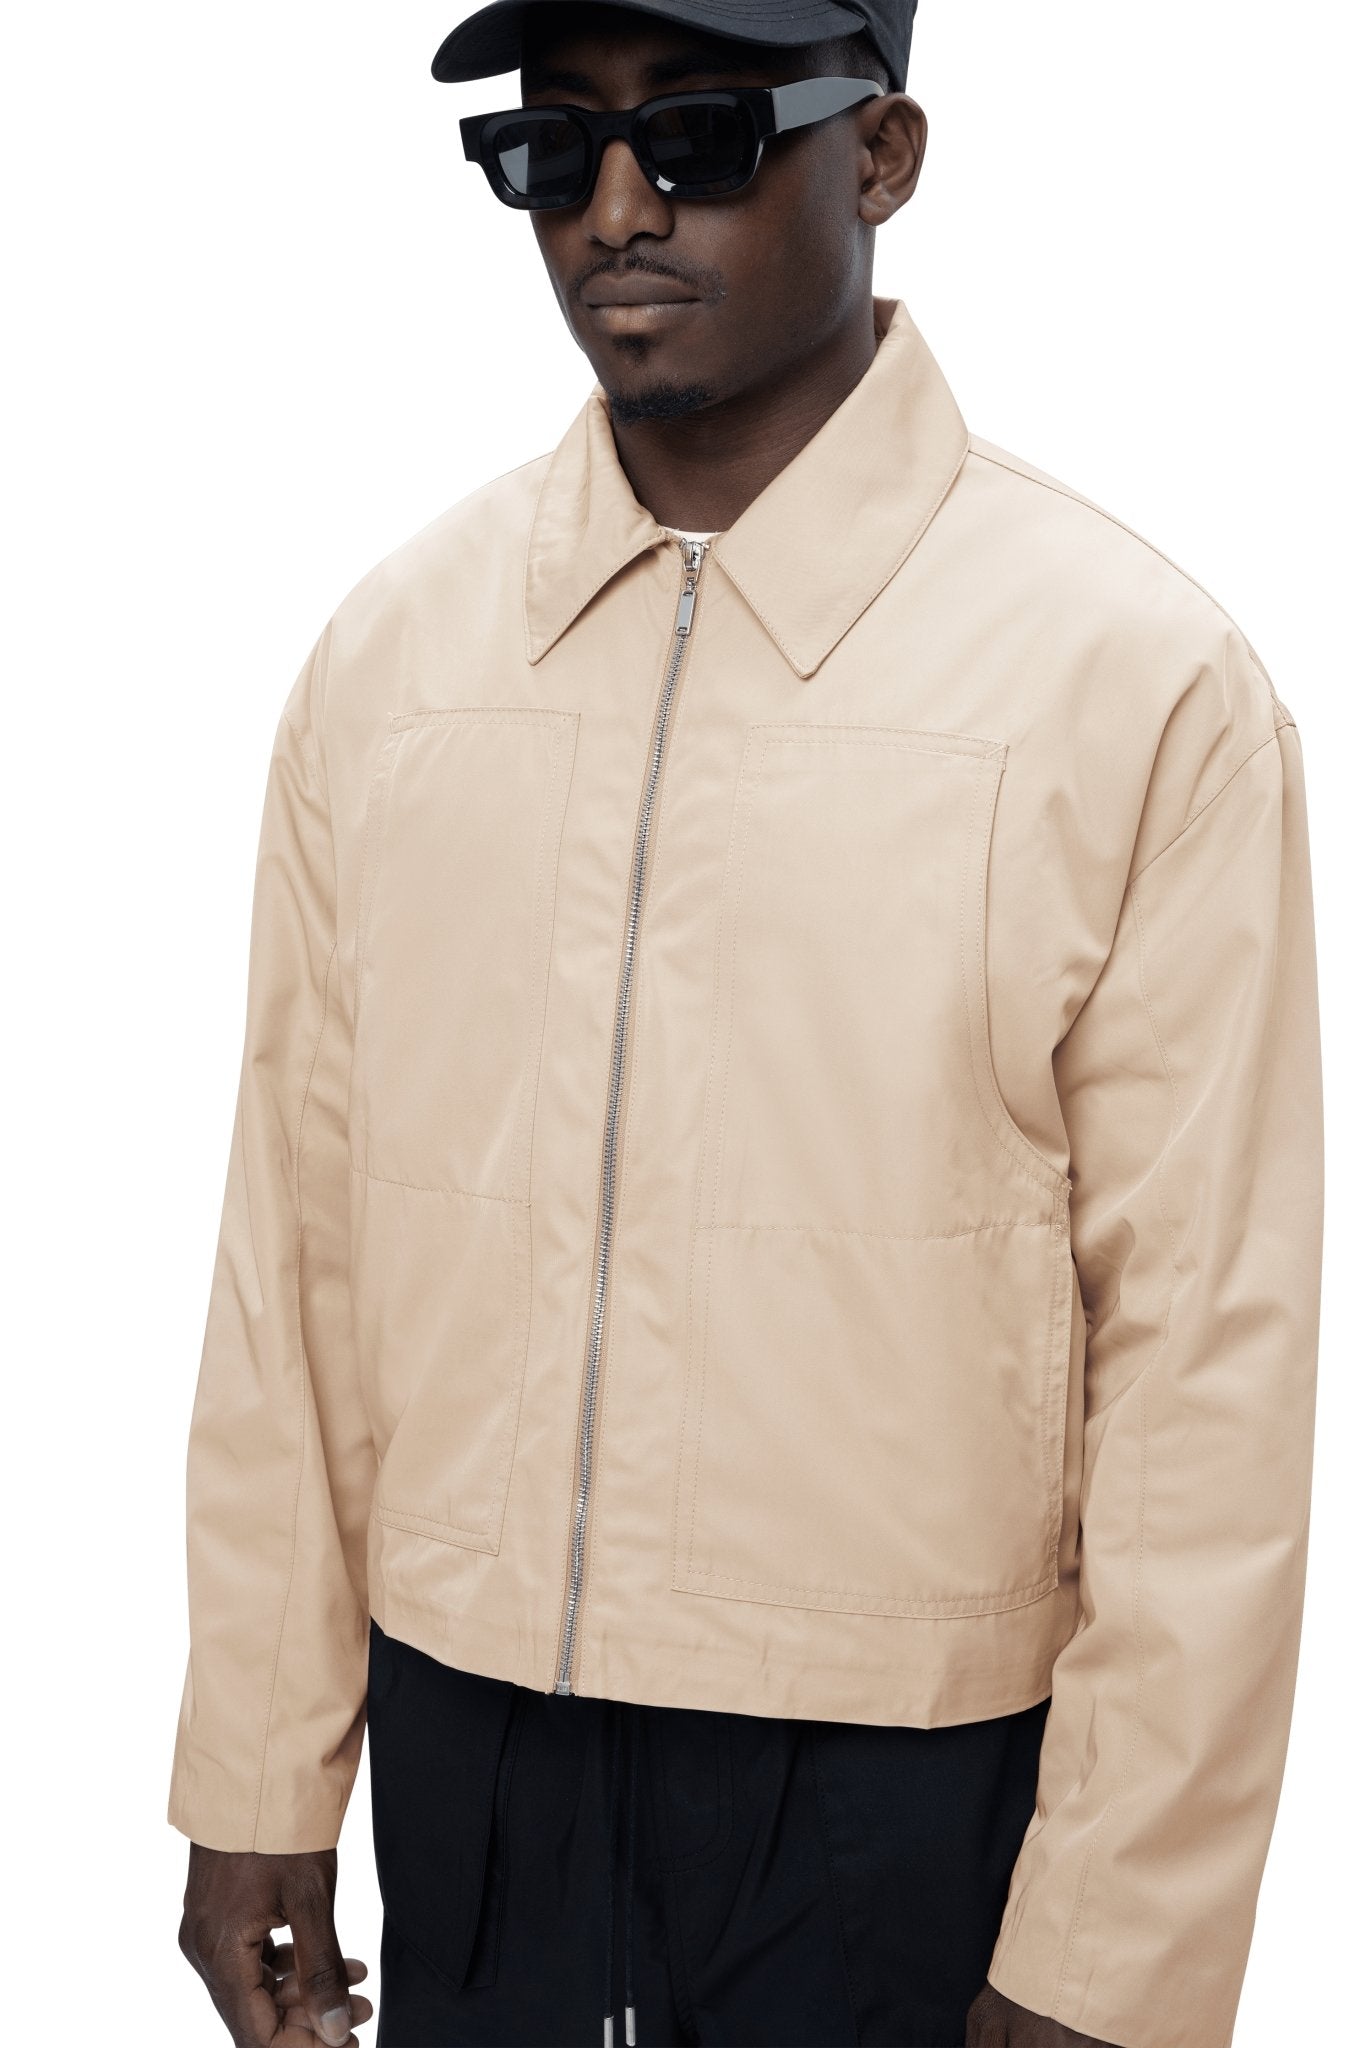 about---blank.comcropped jacket beige